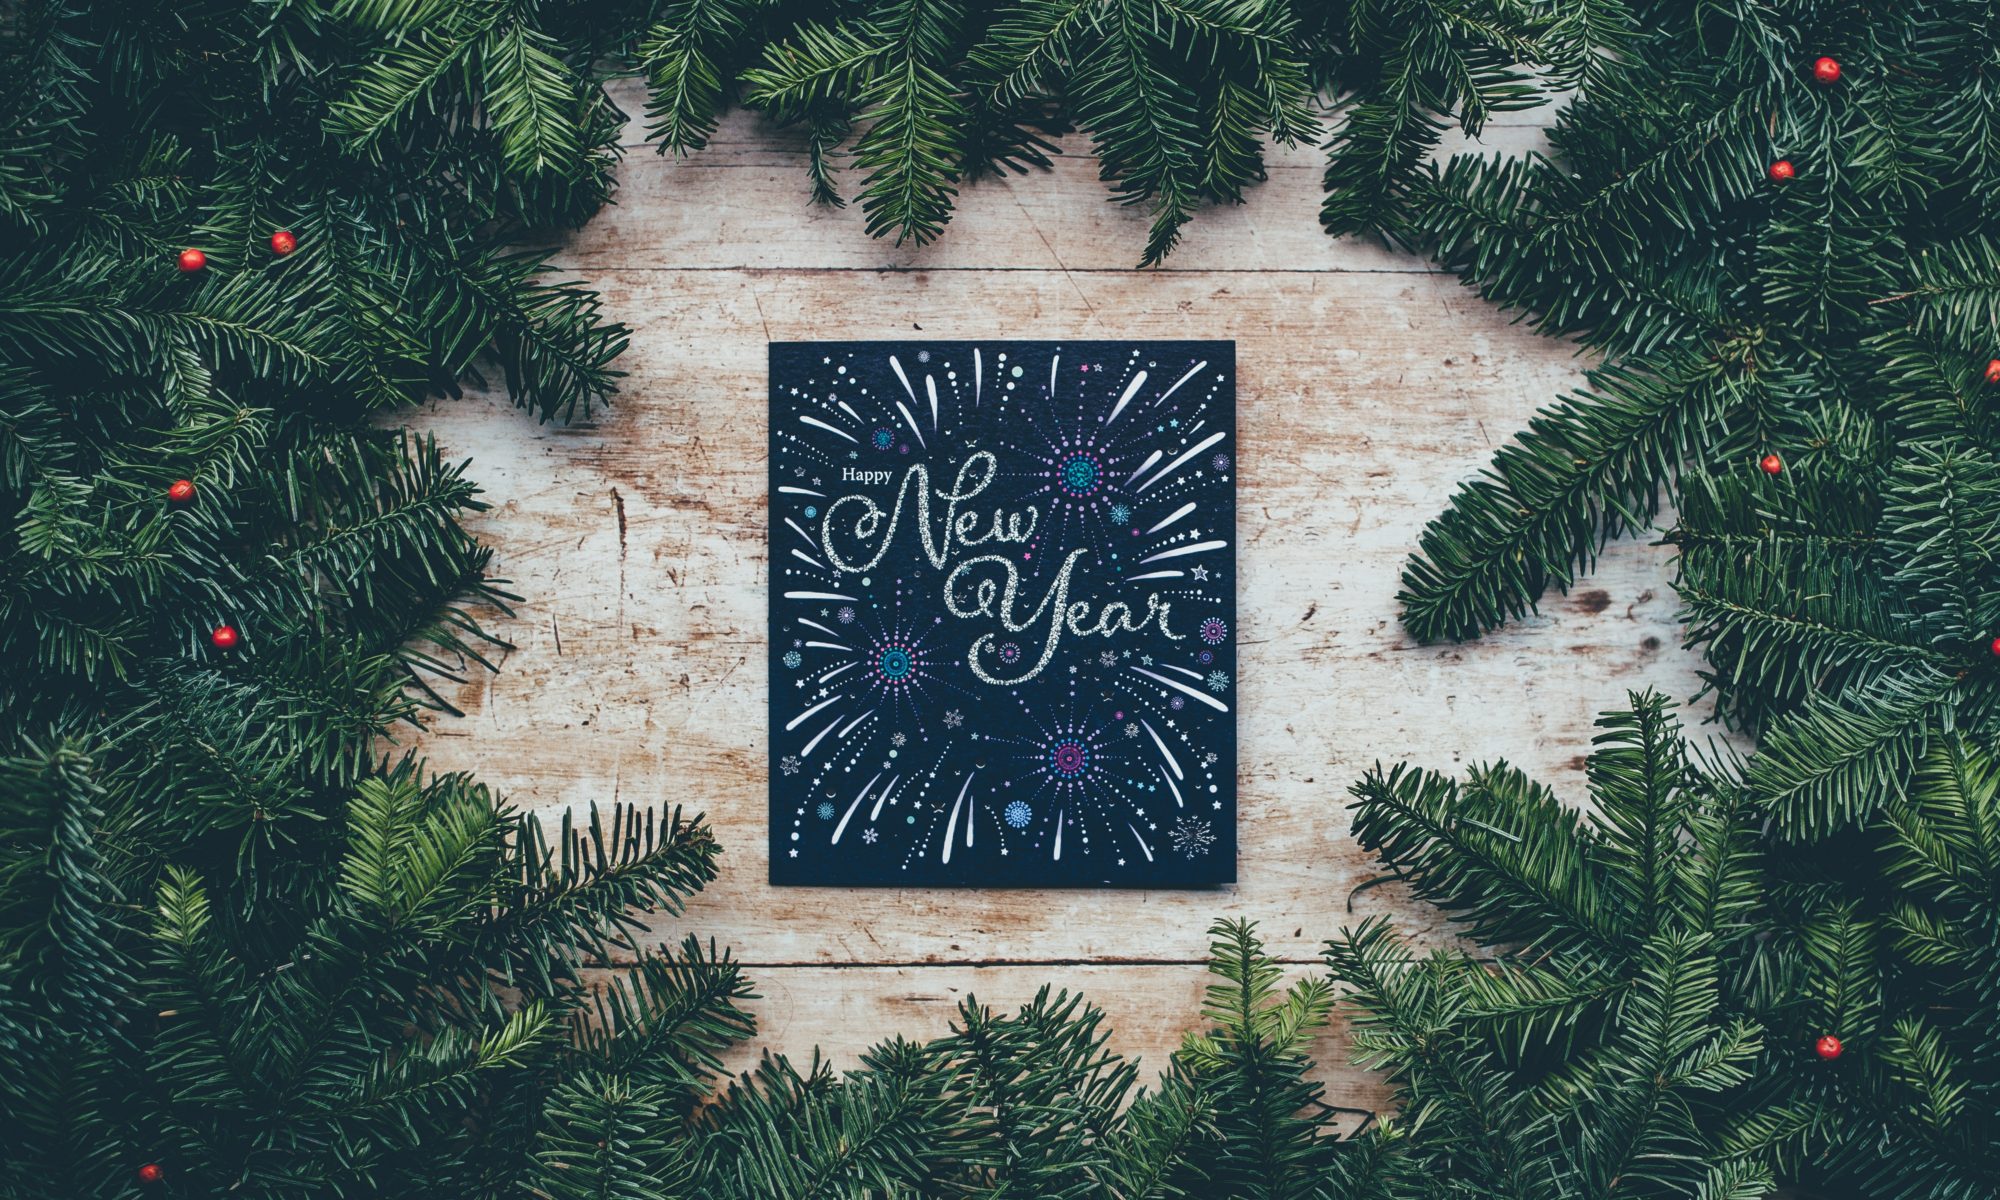 Happy new year sign surrounded by greenery